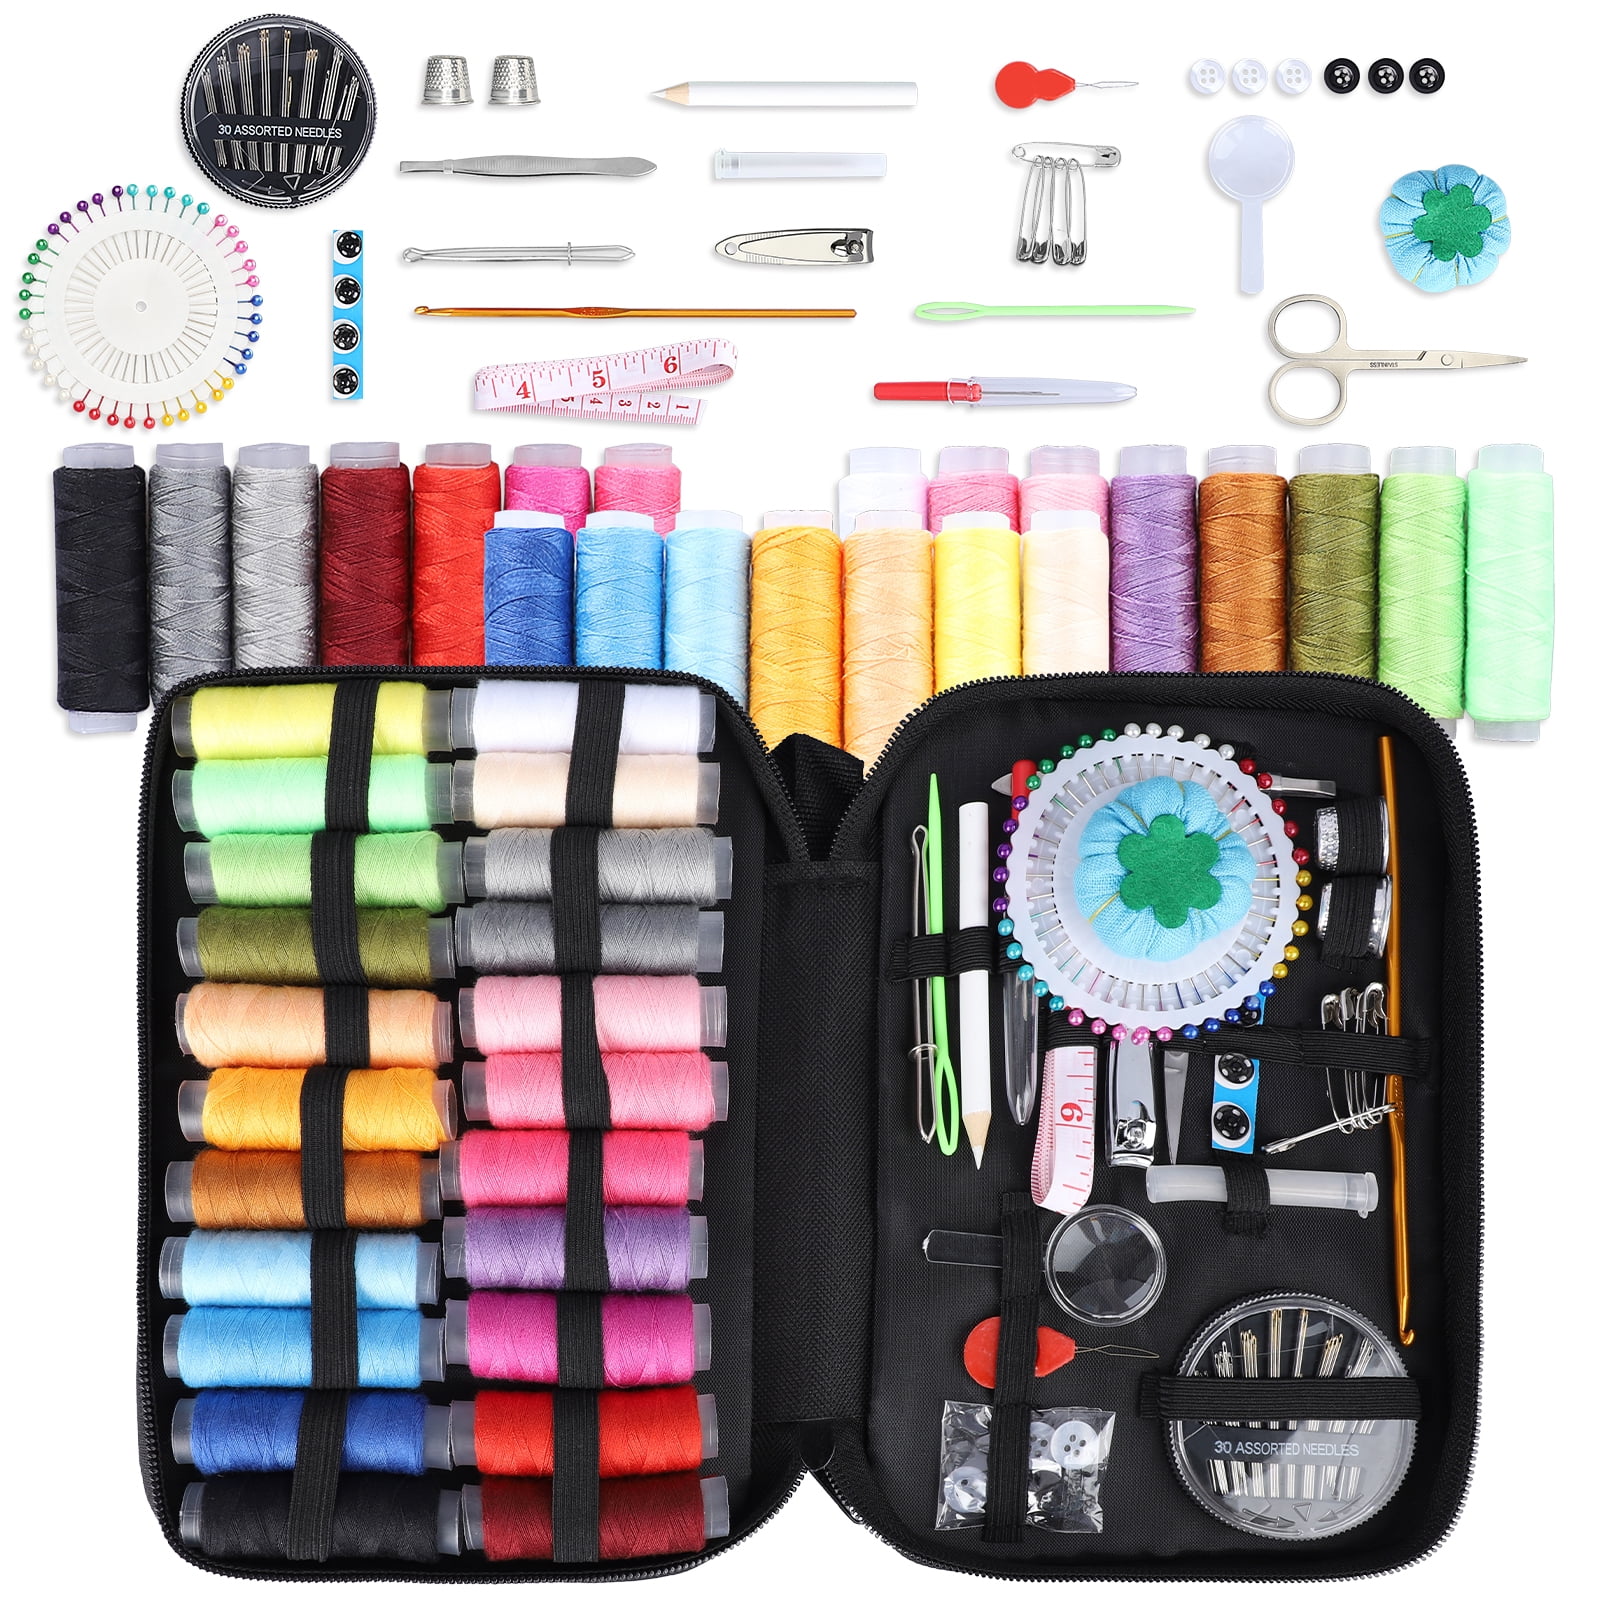 Automatic Needle Threading Device 6 PCS DIY Travel Sewing Kits Sewing Supplies Organizer,Included a Clear Zipper Bag 